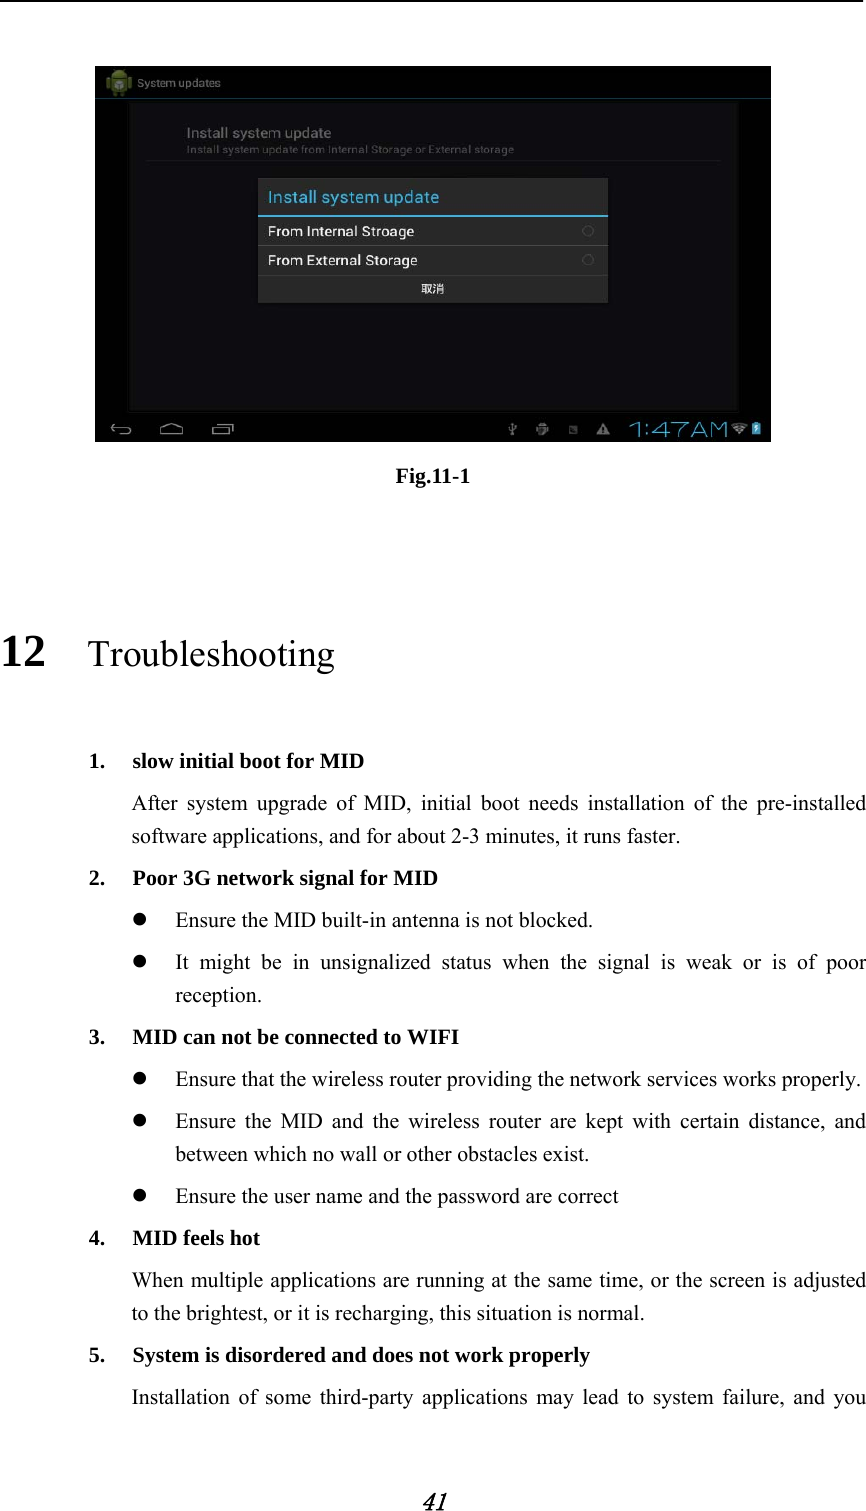     41   Fig.11-1  12 Troubleshooting 1. slow initial boot for MID After system upgrade of MID, initial boot needs installation of the pre-installed software applications, and for about 2-3 minutes, it runs faster. 2. Poor 3G network signal for MID   z Ensure the MID built-in antenna is not blocked. z It might be in unsignalized status when the signal is weak or is of poor reception. 3. MID can not be connected to WIFI z Ensure that the wireless router providing the network services works properly. z Ensure the MID and the wireless router are kept with certain distance, and between which no wall or other obstacles exist. z Ensure the user name and the password are correct 4. MID feels hot When multiple applications are running at the same time, or the screen is adjusted to the brightest, or it is recharging, this situation is normal. 5. System is disordered and does not work properly Installation of some third-party applications may lead to system failure, and you 